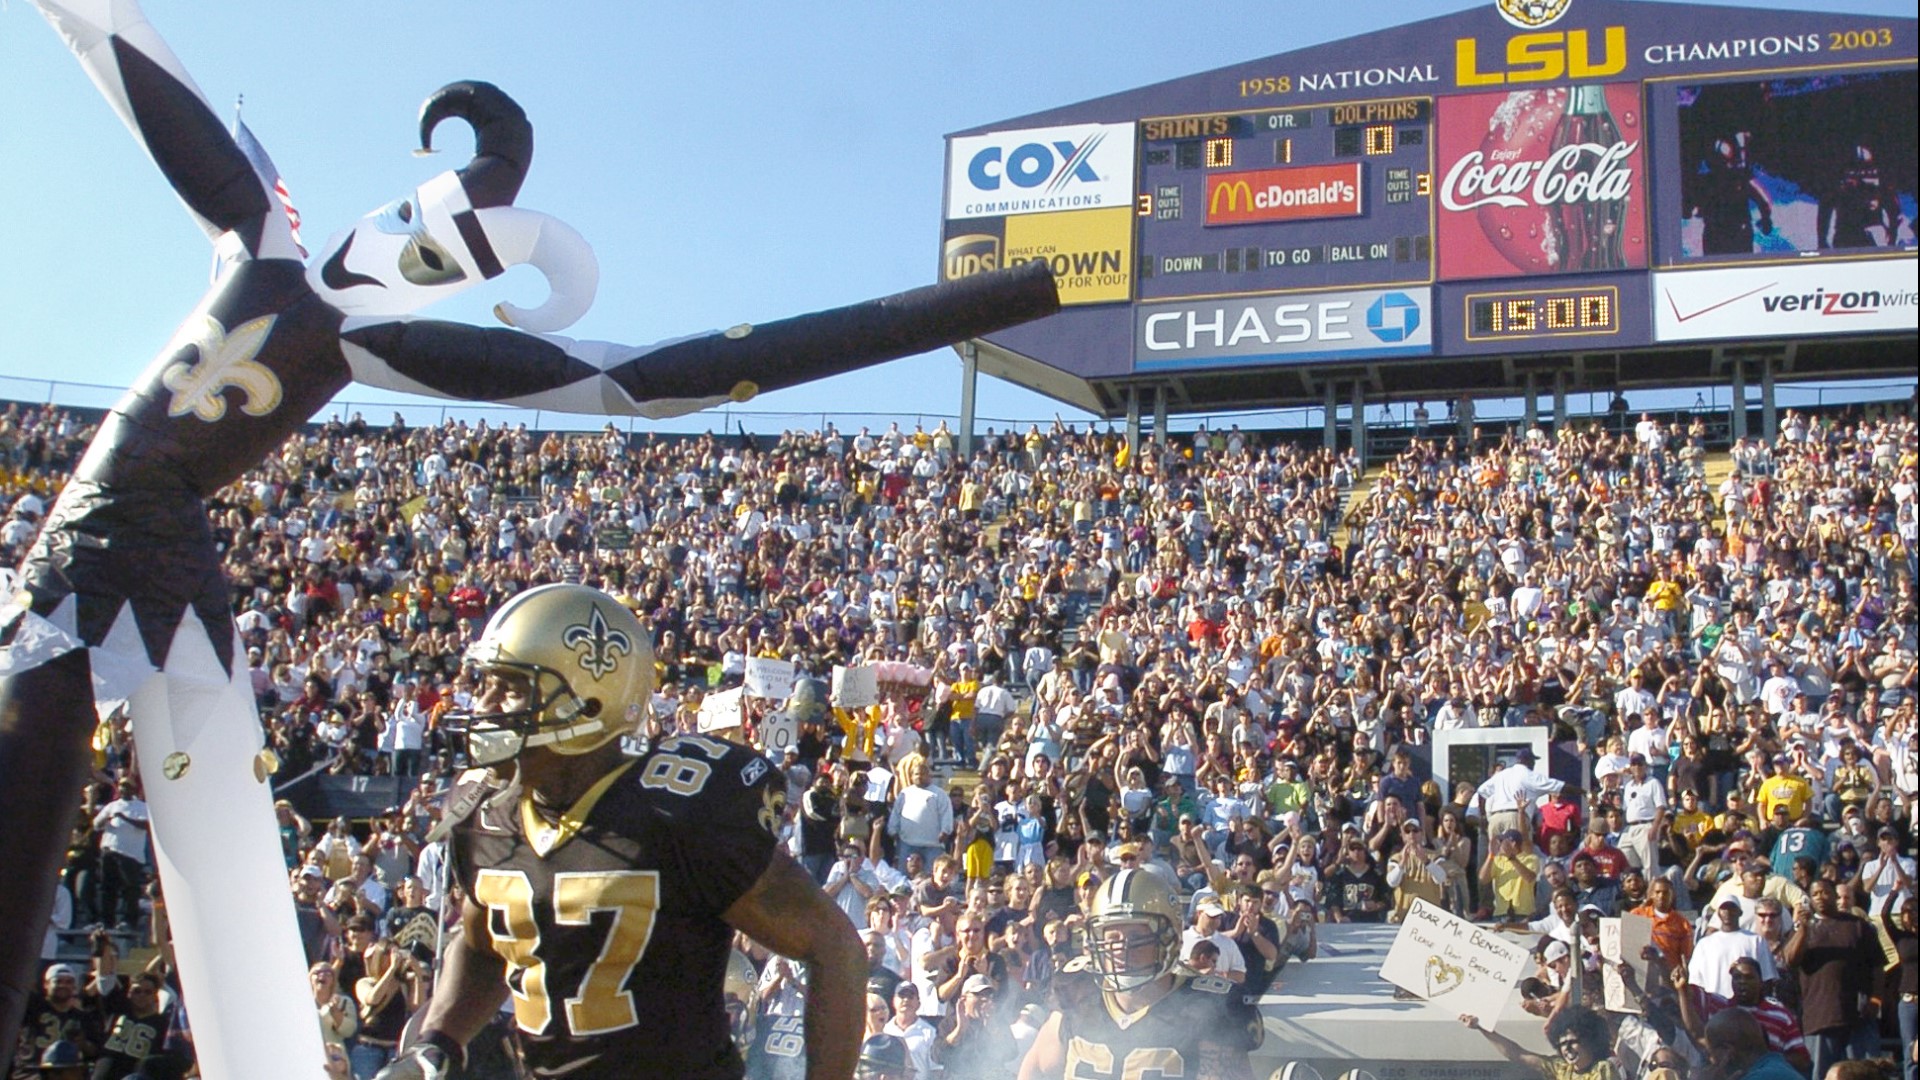 Since New Orleans hasn't budged, the Saints are looking elsewhere to bring fans back to games.